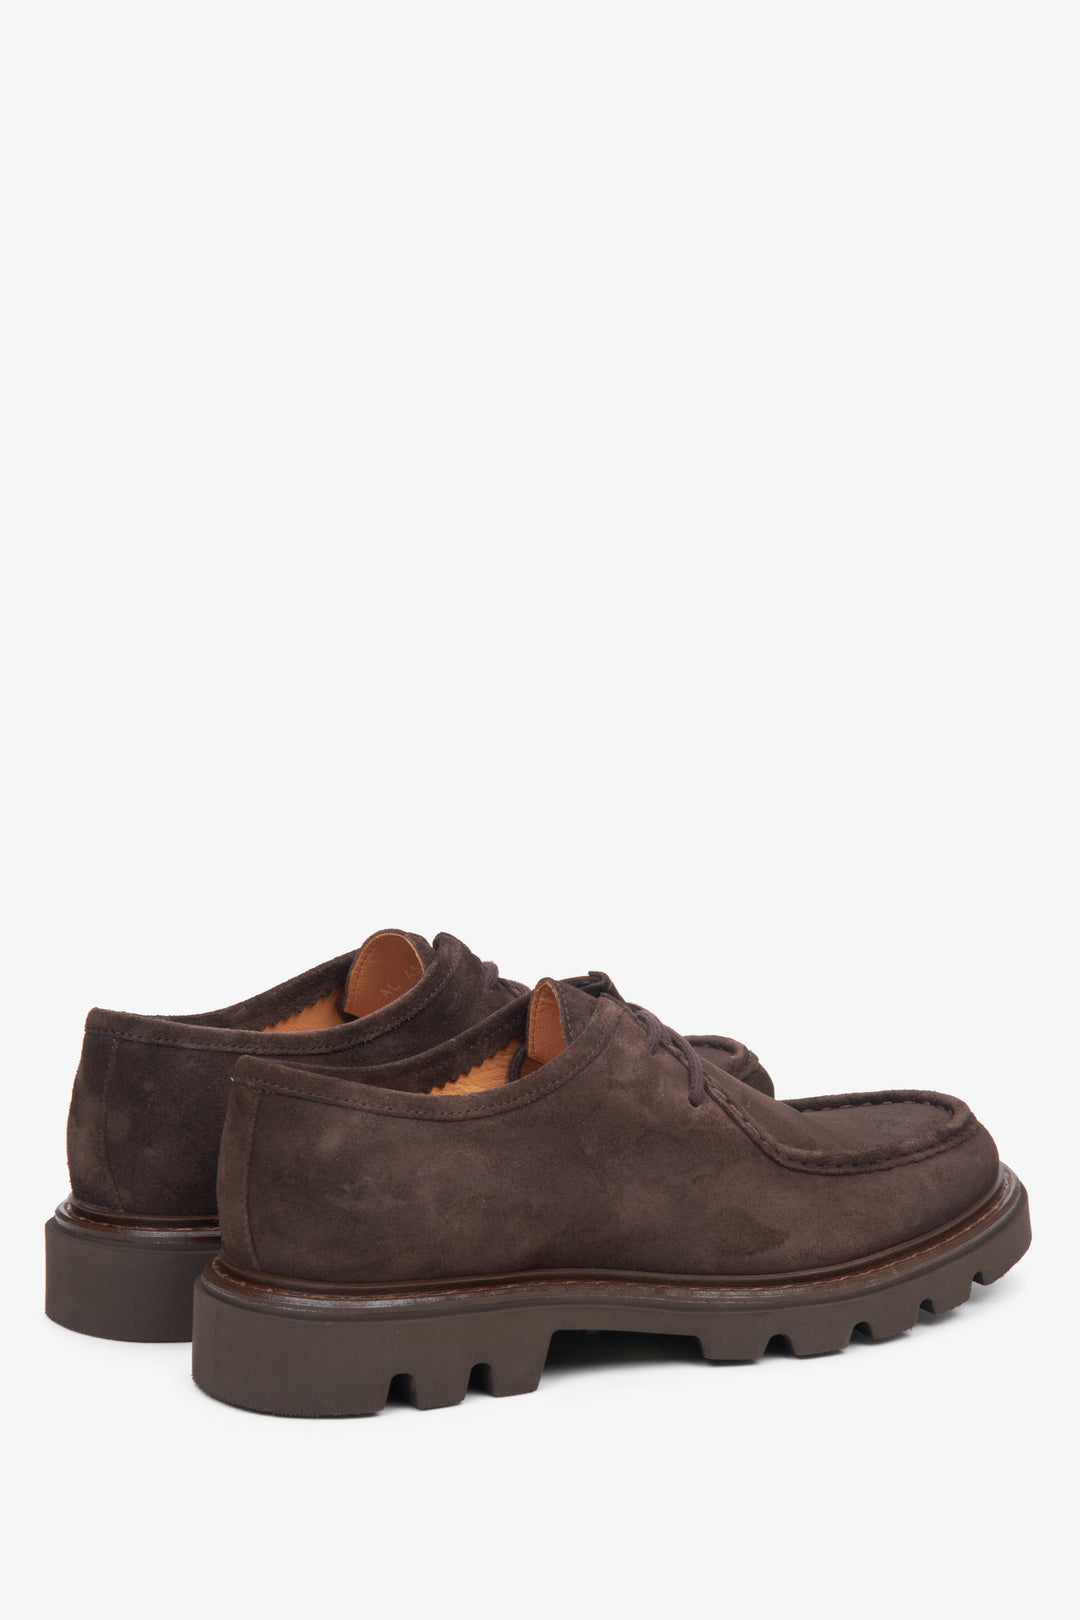 Men's velour brown lace-up shoes by Estro - close-up on the side line and heel.